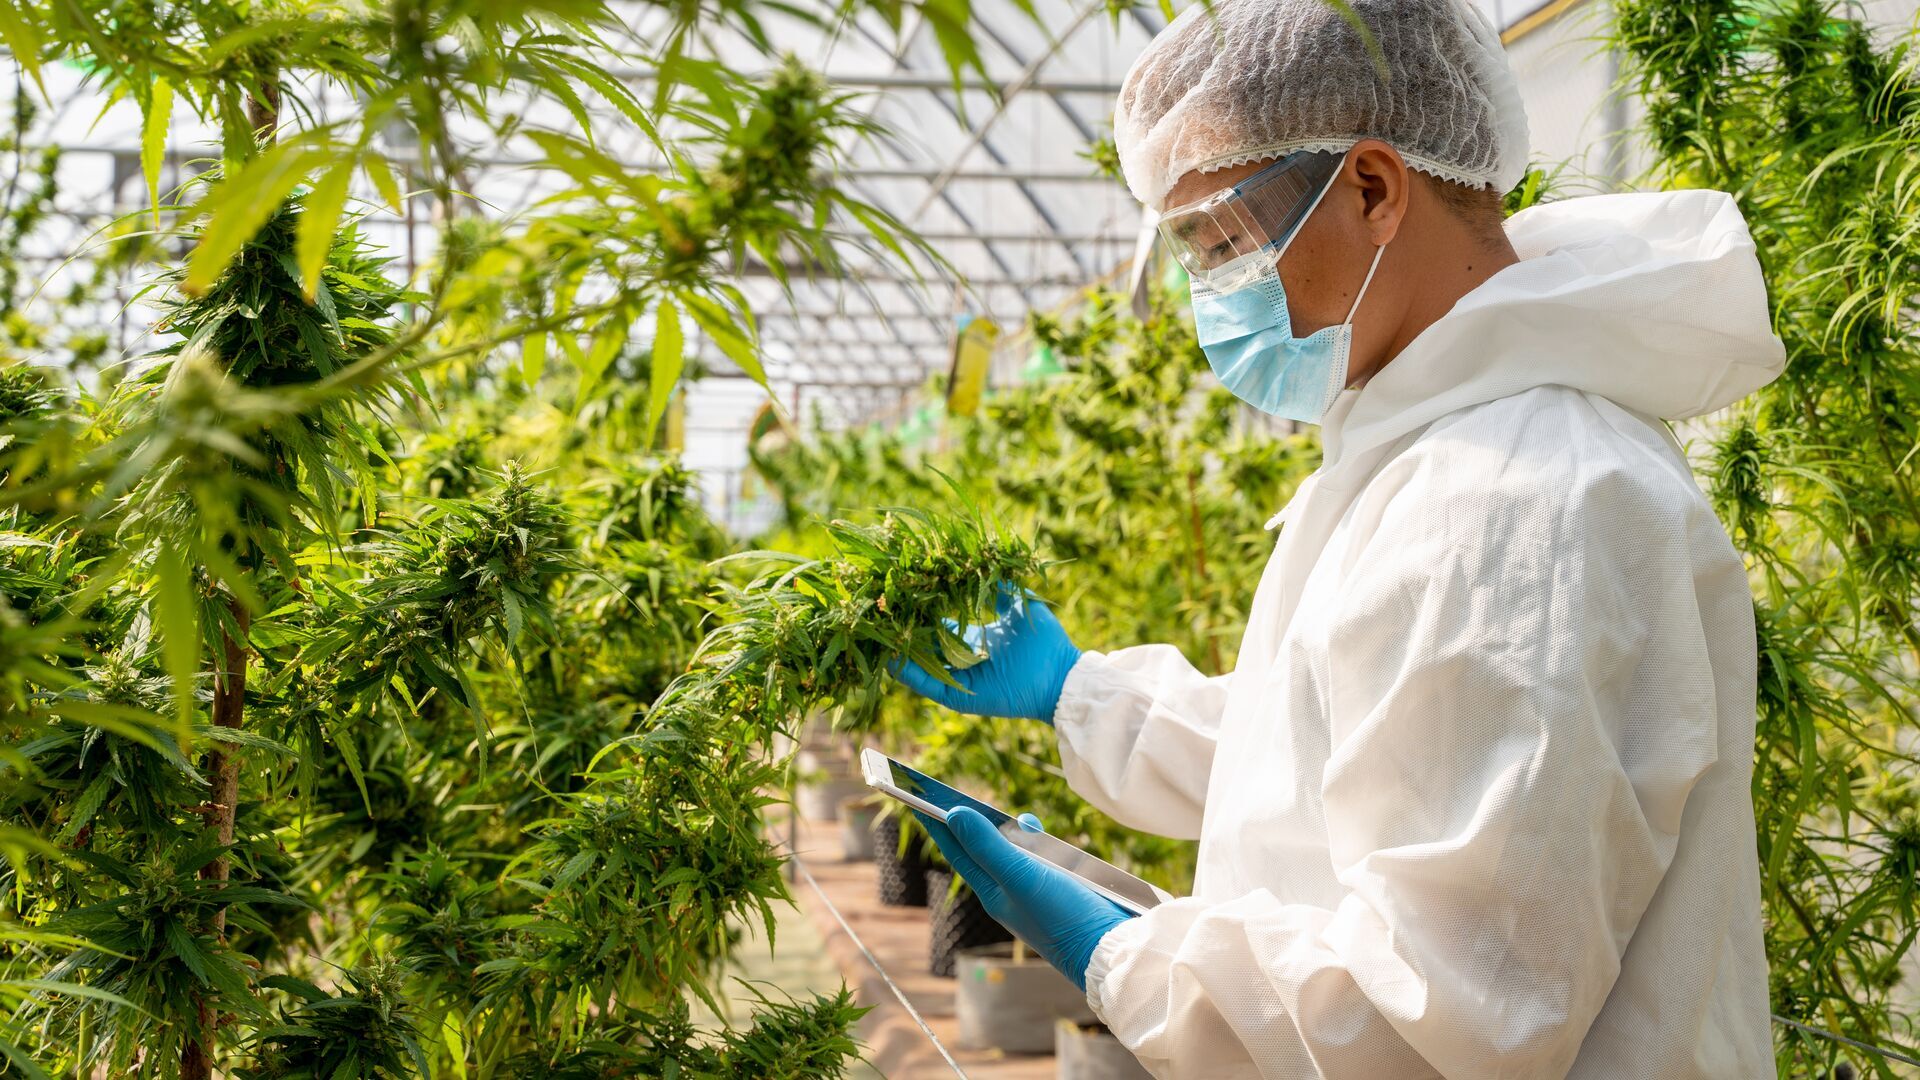 Photograph of a man in a greenhouse tending to cannabis plants.